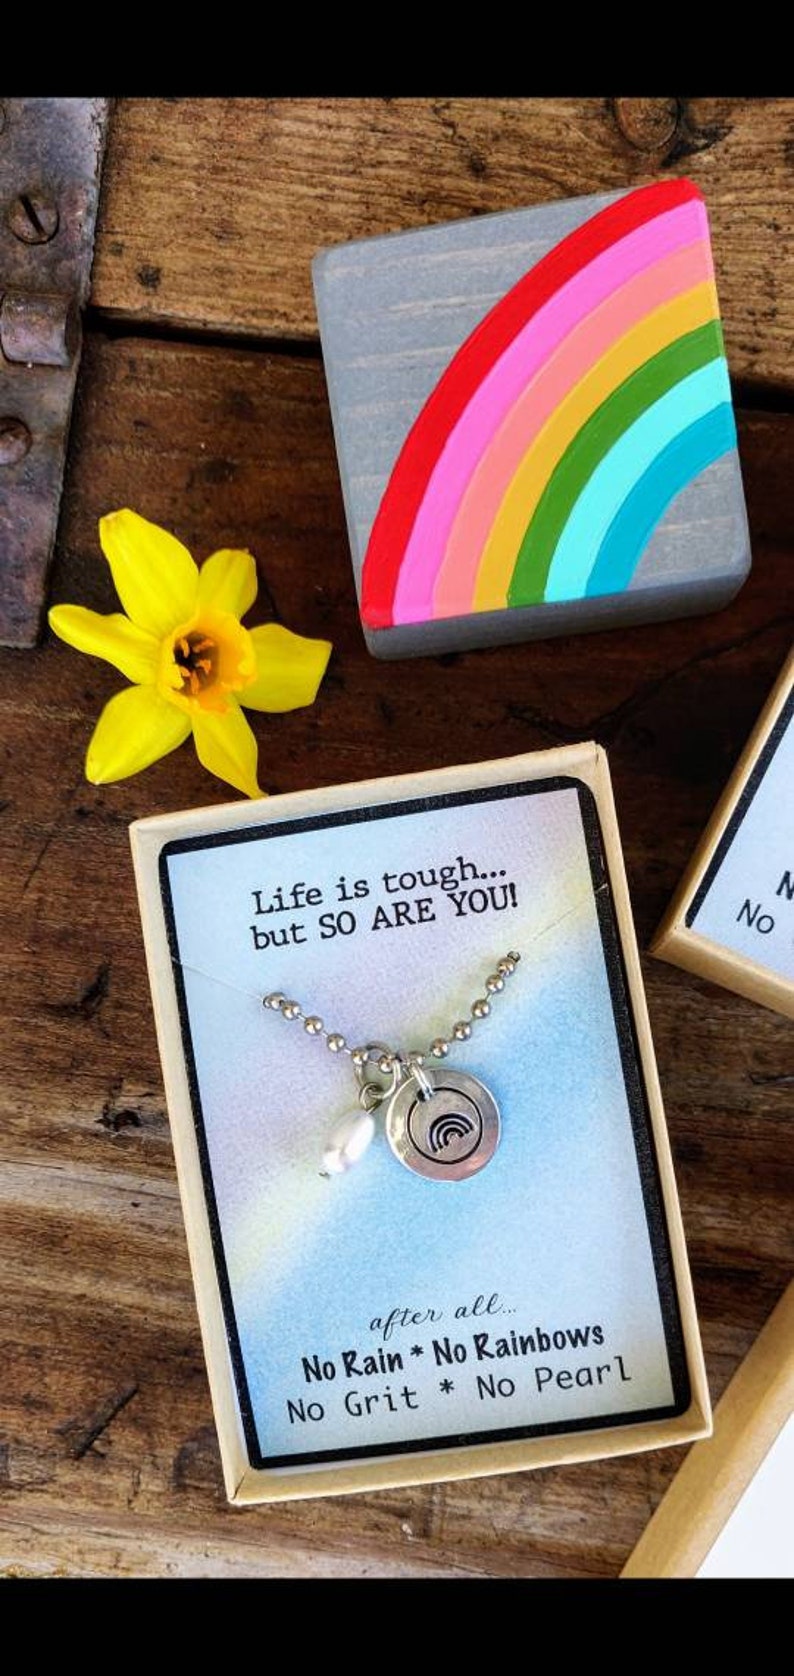 Rainbow & Pearl Necklace, No Rain No Rainbow, No Grit No Pearl, teacher gift, friend gift, encouragement gift, Life is tough but so are you image 2